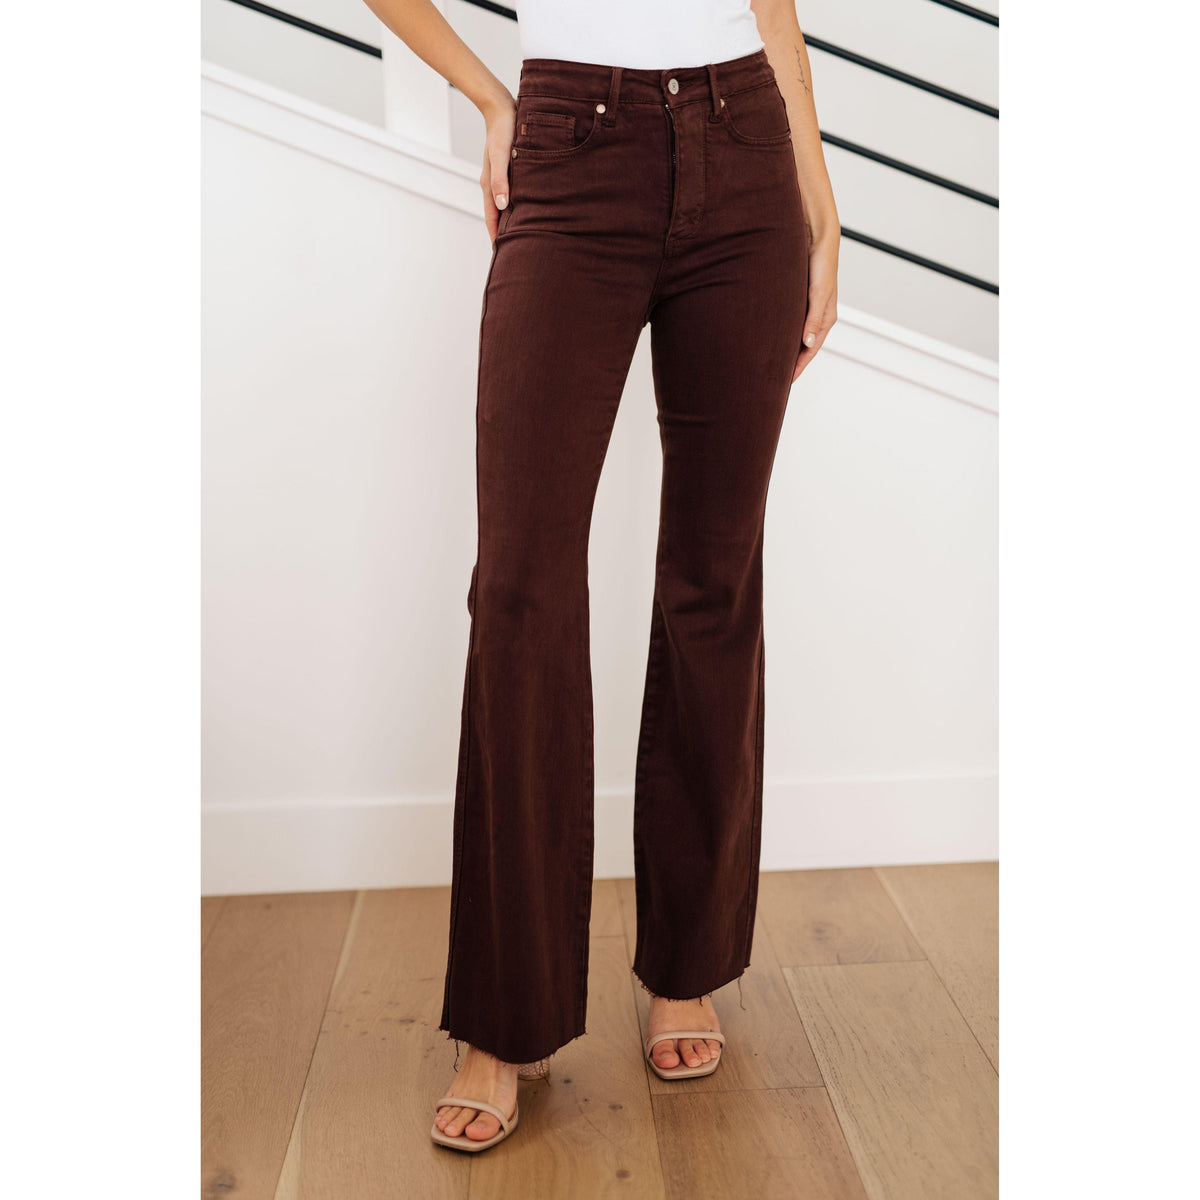 Judy Blue | Sienna High Rise Control Top Flare Jeans in Espresso - becauseofadi